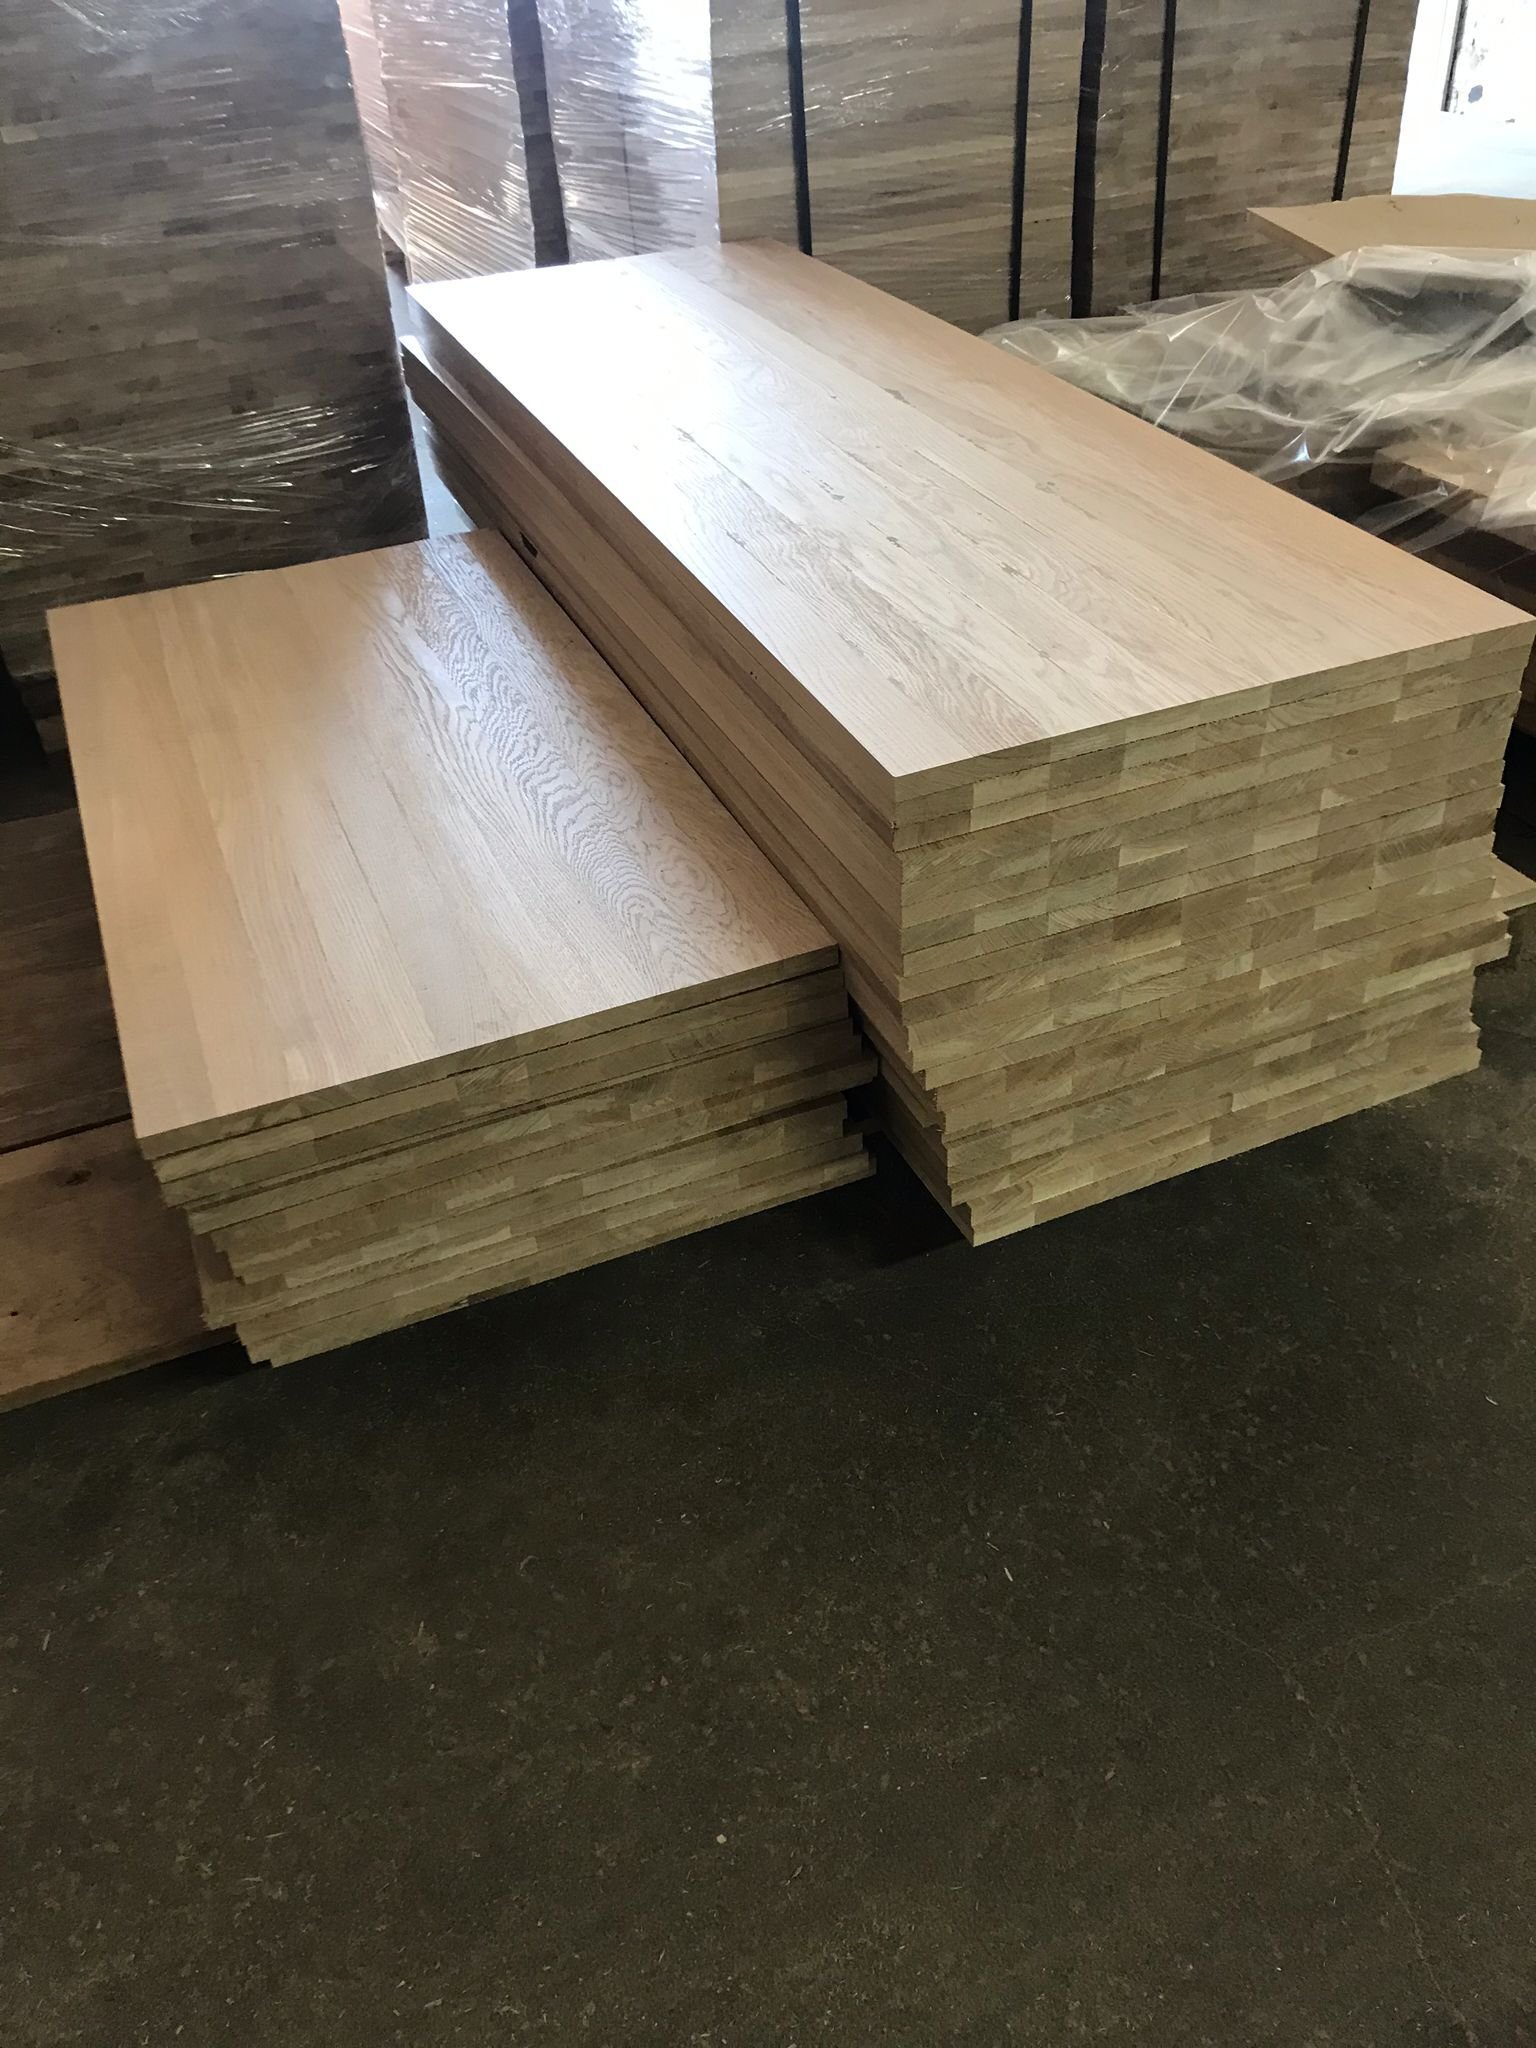 Stack with oak edge glued panels before packing